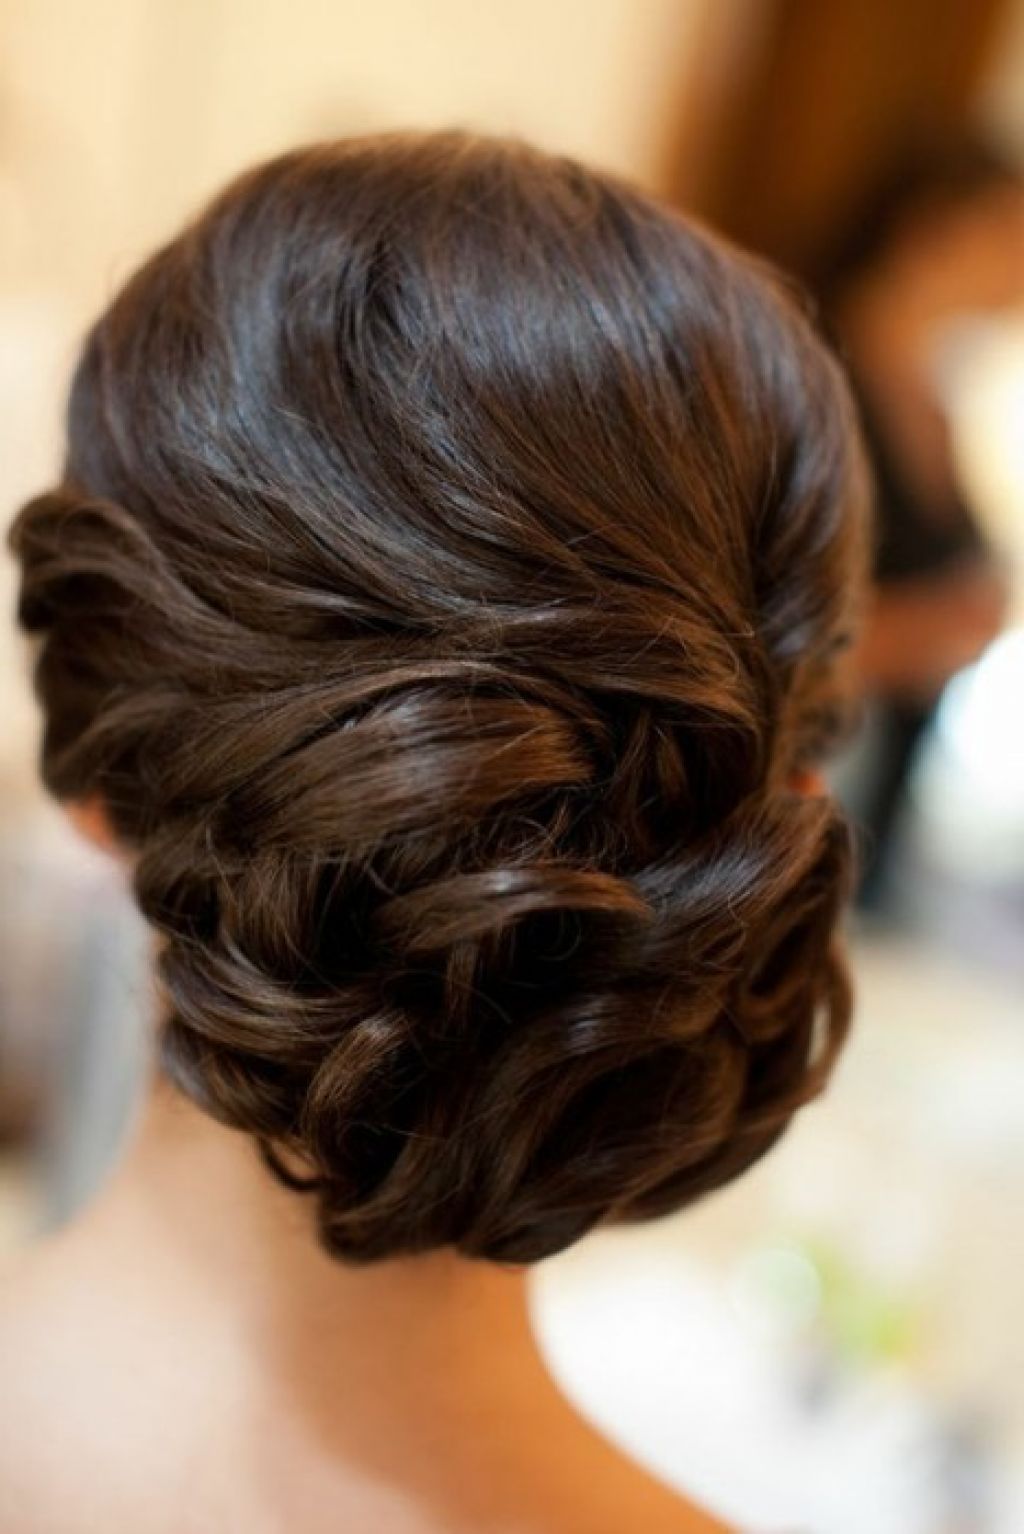 20 Easy Updo Hairstyles for Long Hair - MagMent